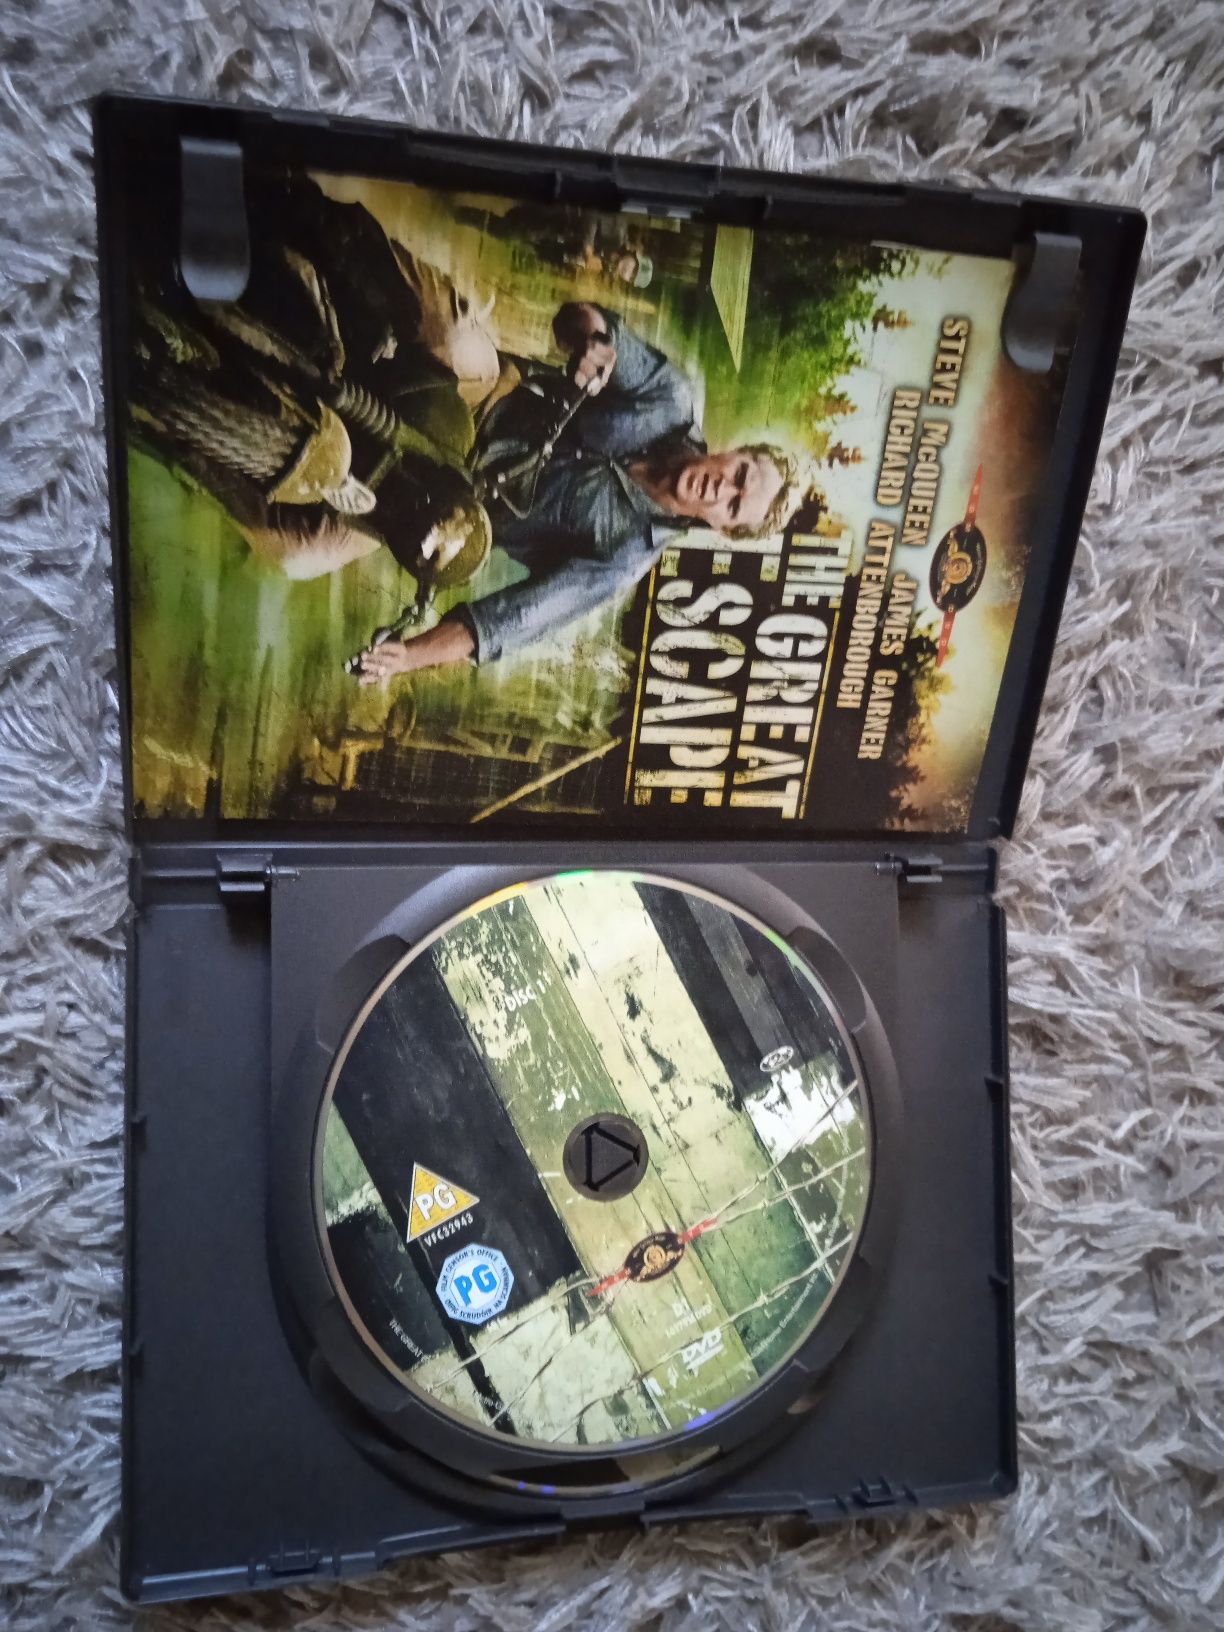 DVD Collection edition"The great escape"